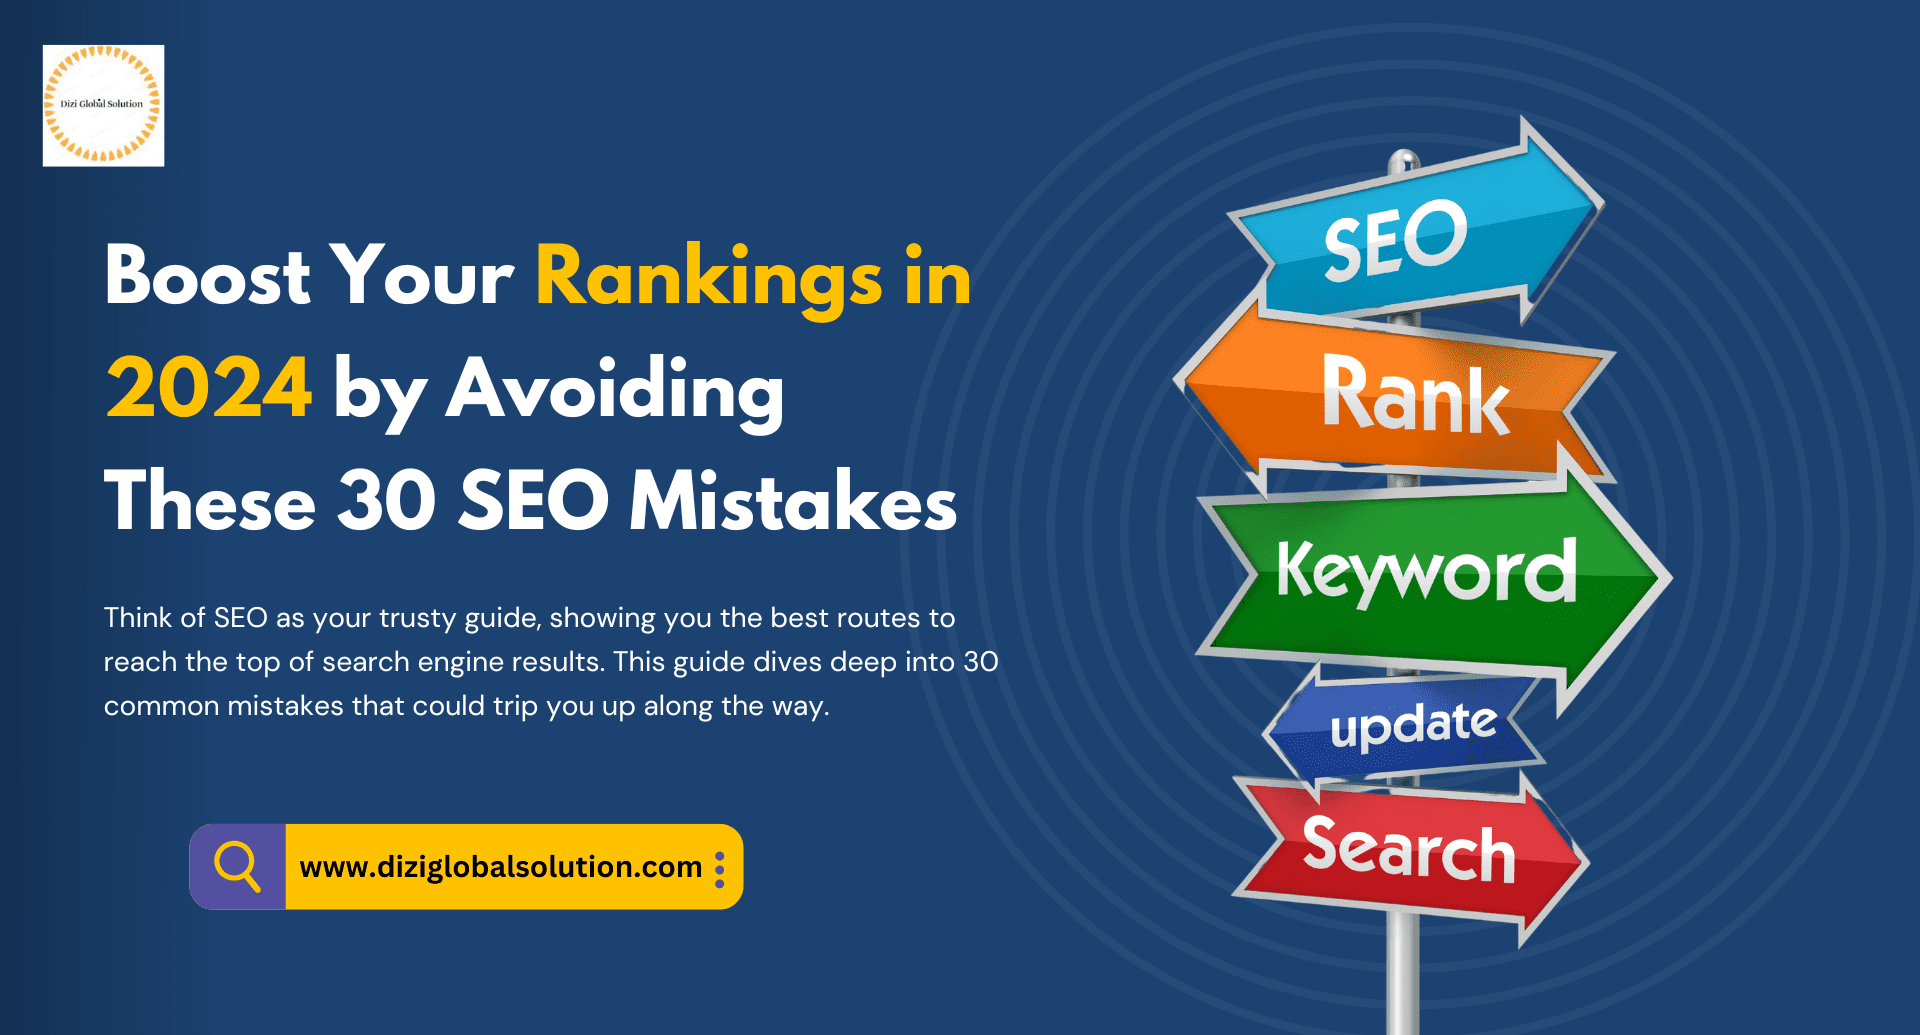 Boost Your Rankings in 2024 by Avoiding These 30 SEO Mistakes